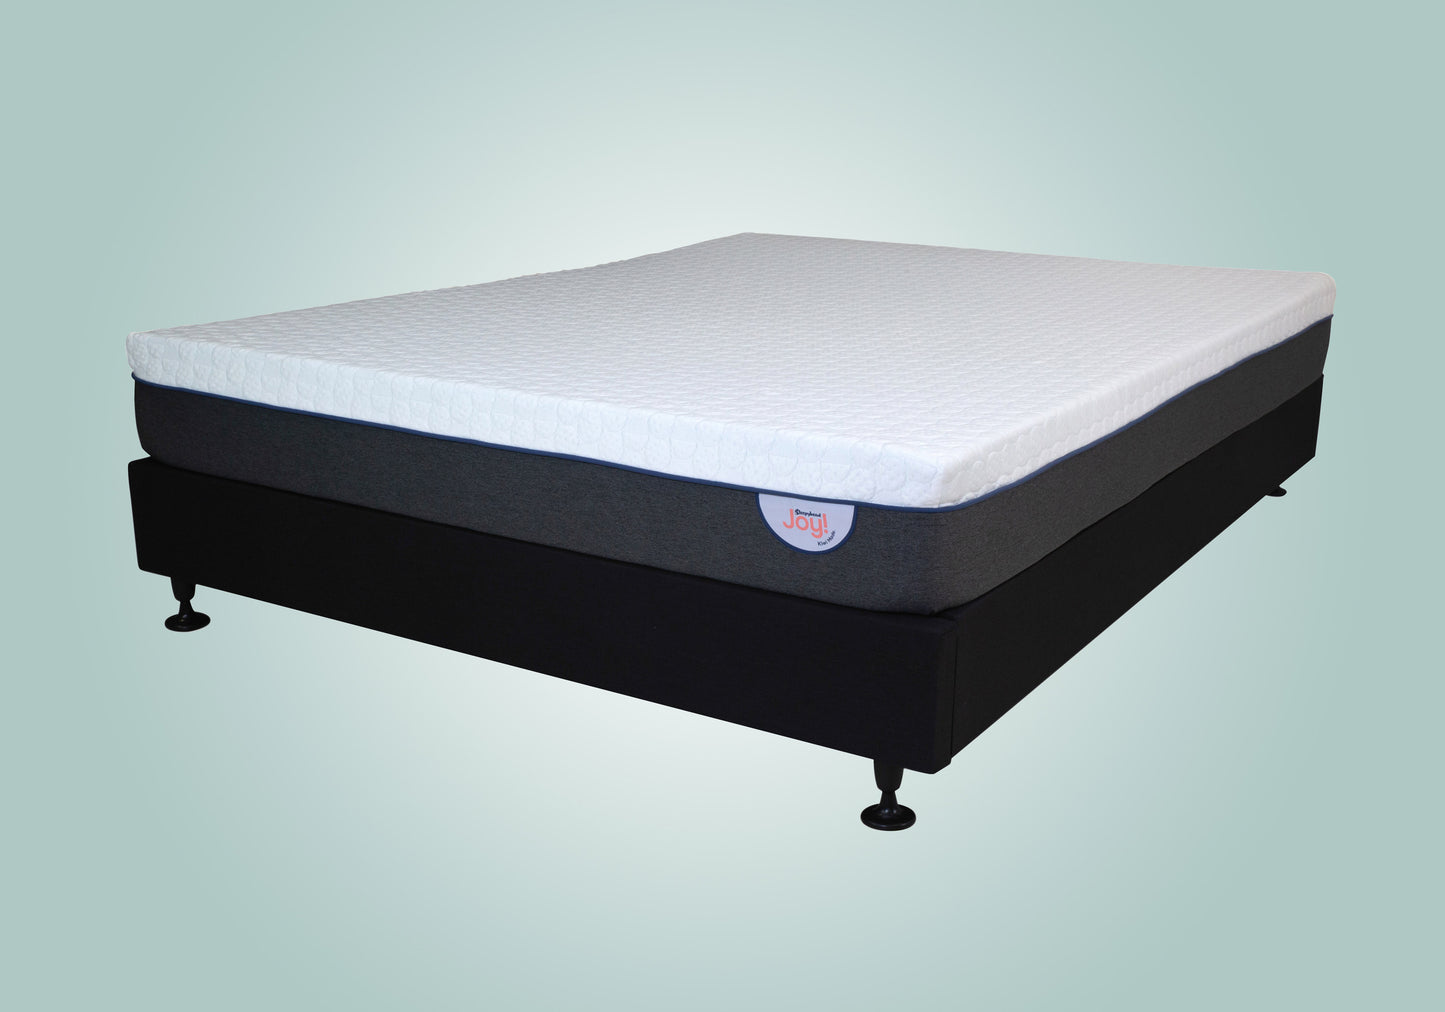 Joy Mattress with Kitset - Easy Assembly and Comfortable Sleep